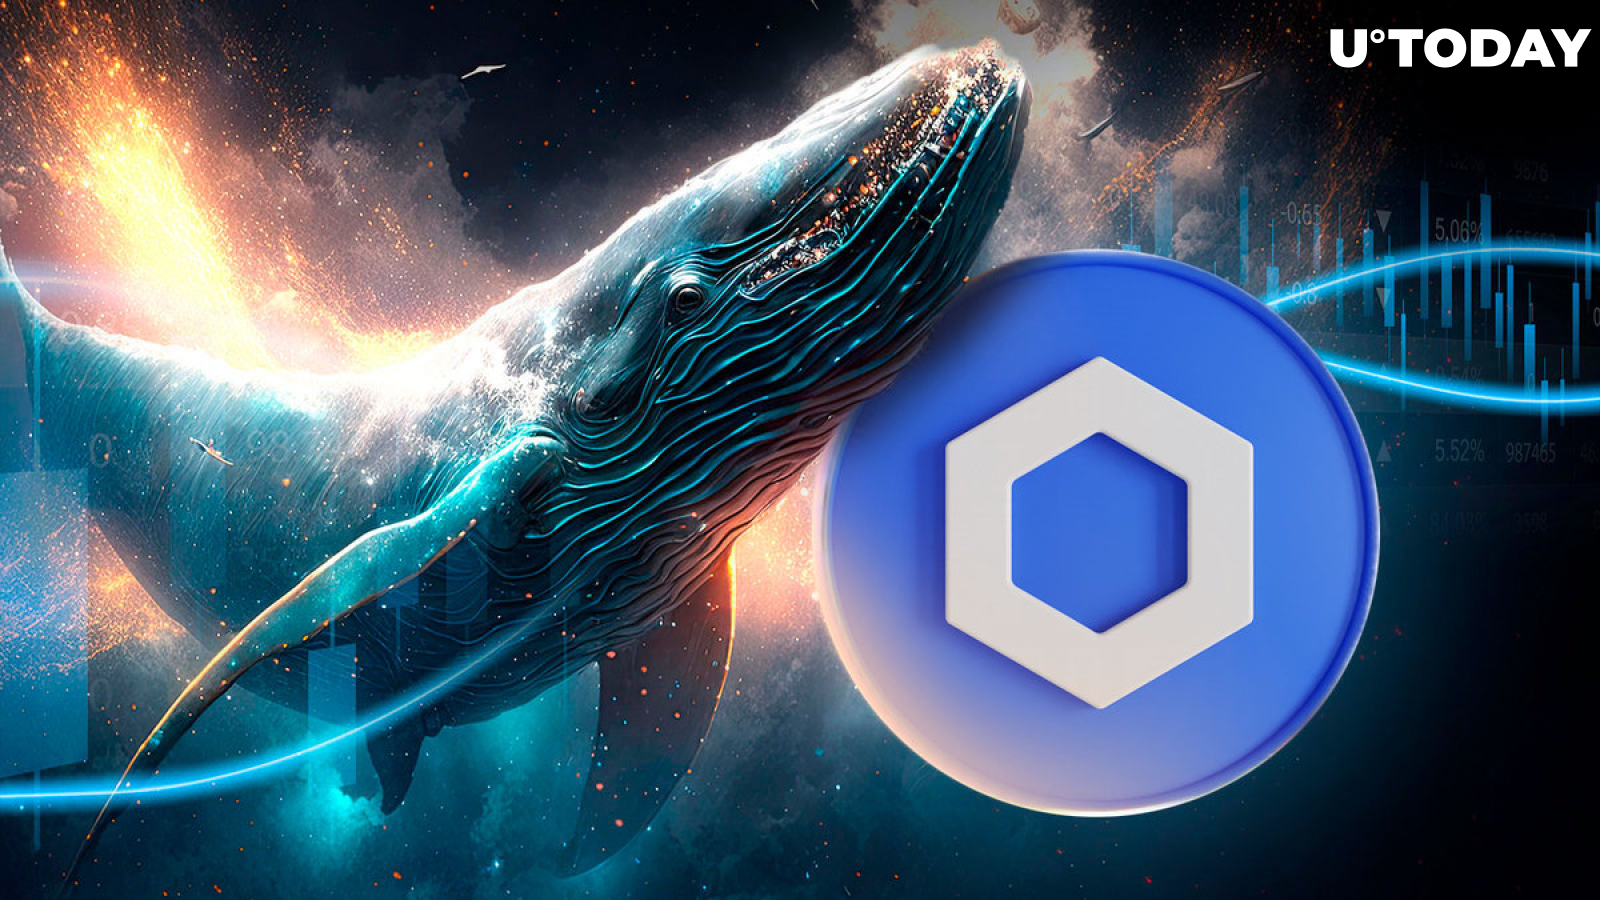 Chainlink Whales Are Making Massive Buys: Will LINK Price Rally?